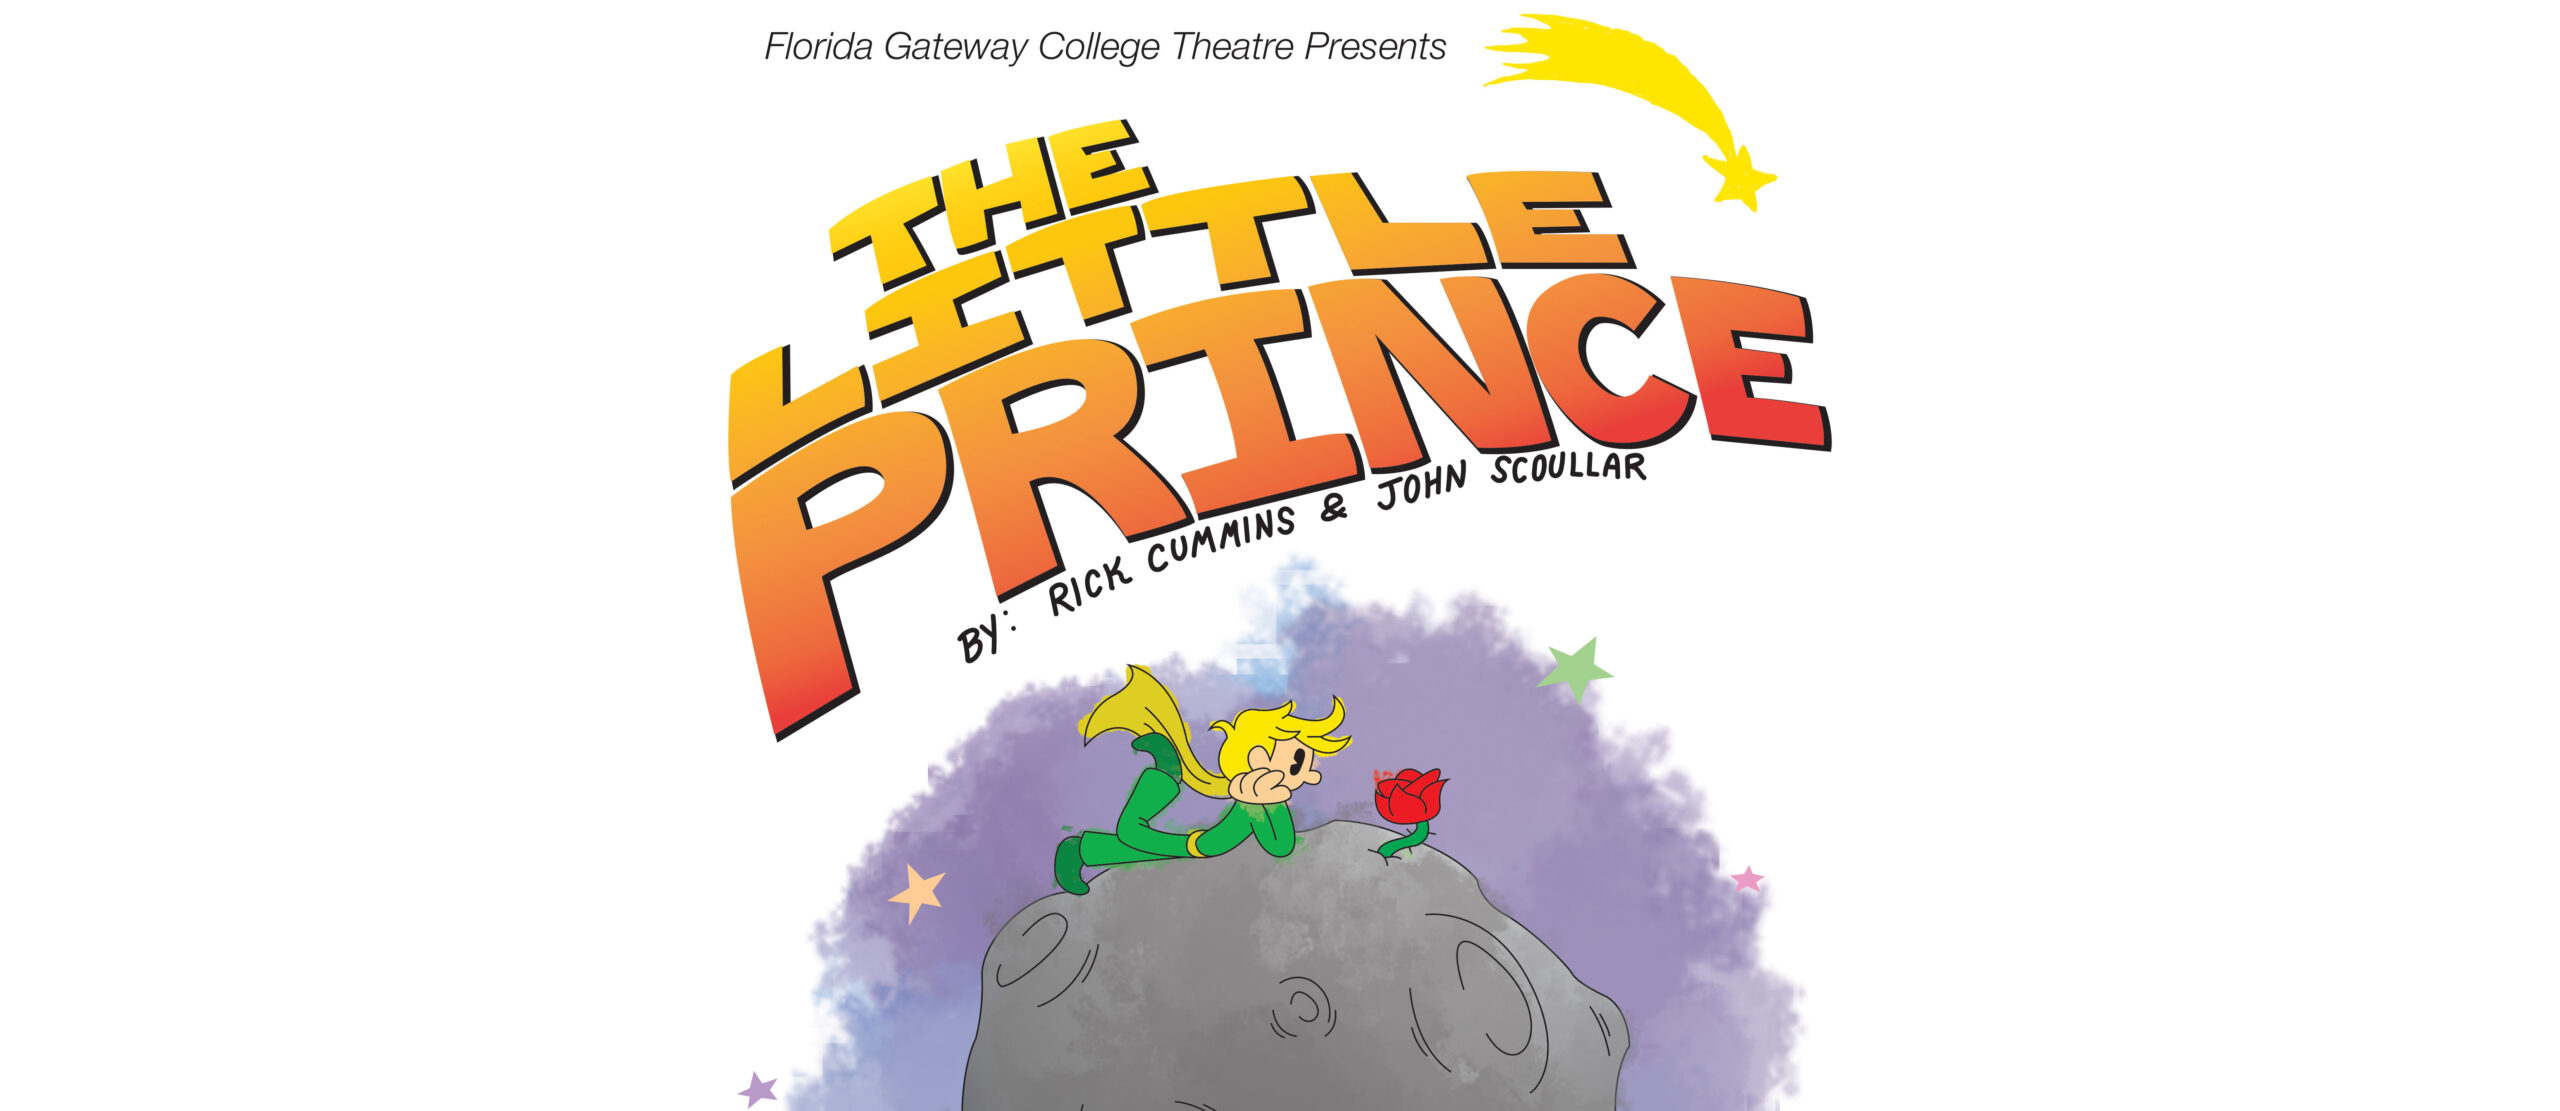 FGC Theatre to Present “The Little Prince”